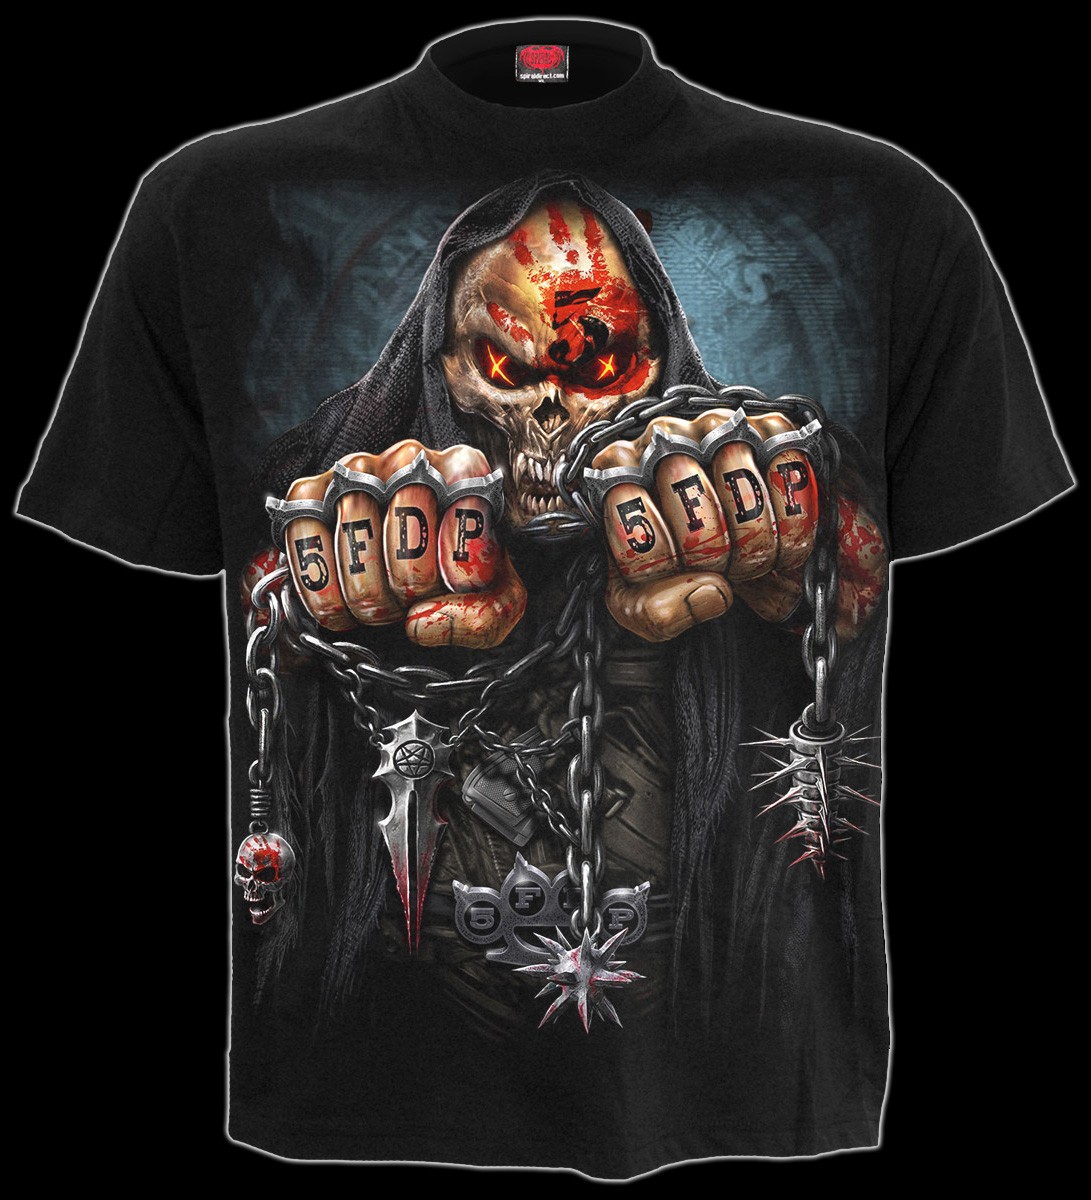 5FDP Game Over - Five Finger Death Punch T-Shirt